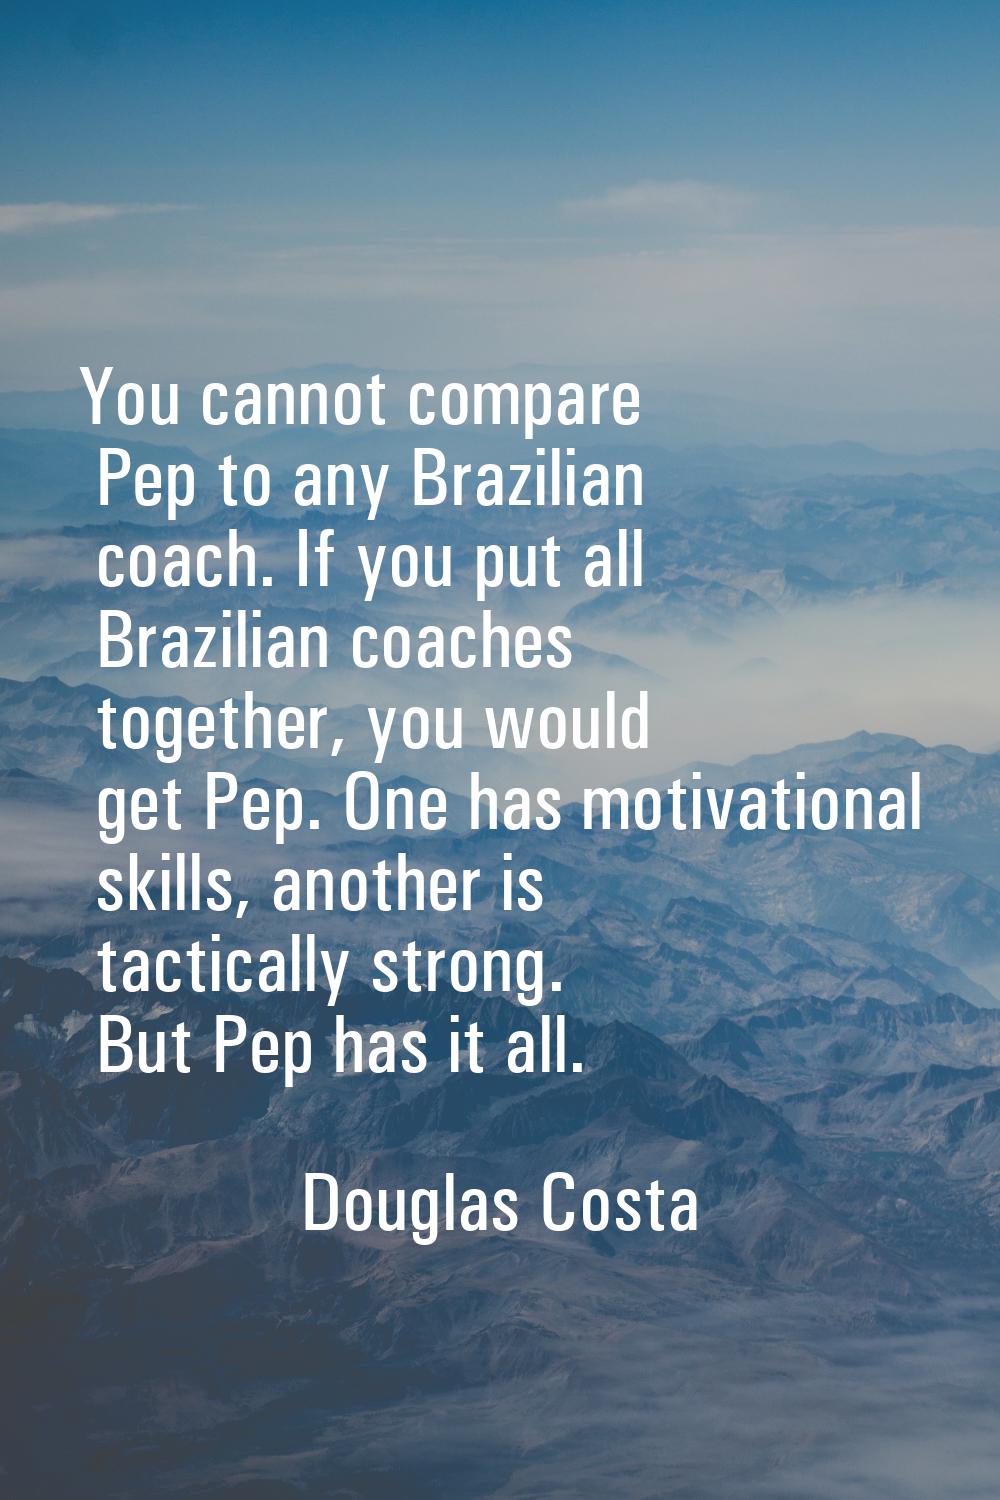 You cannot compare Pep to any Brazilian coach. If you put all Brazilian coaches together, you would